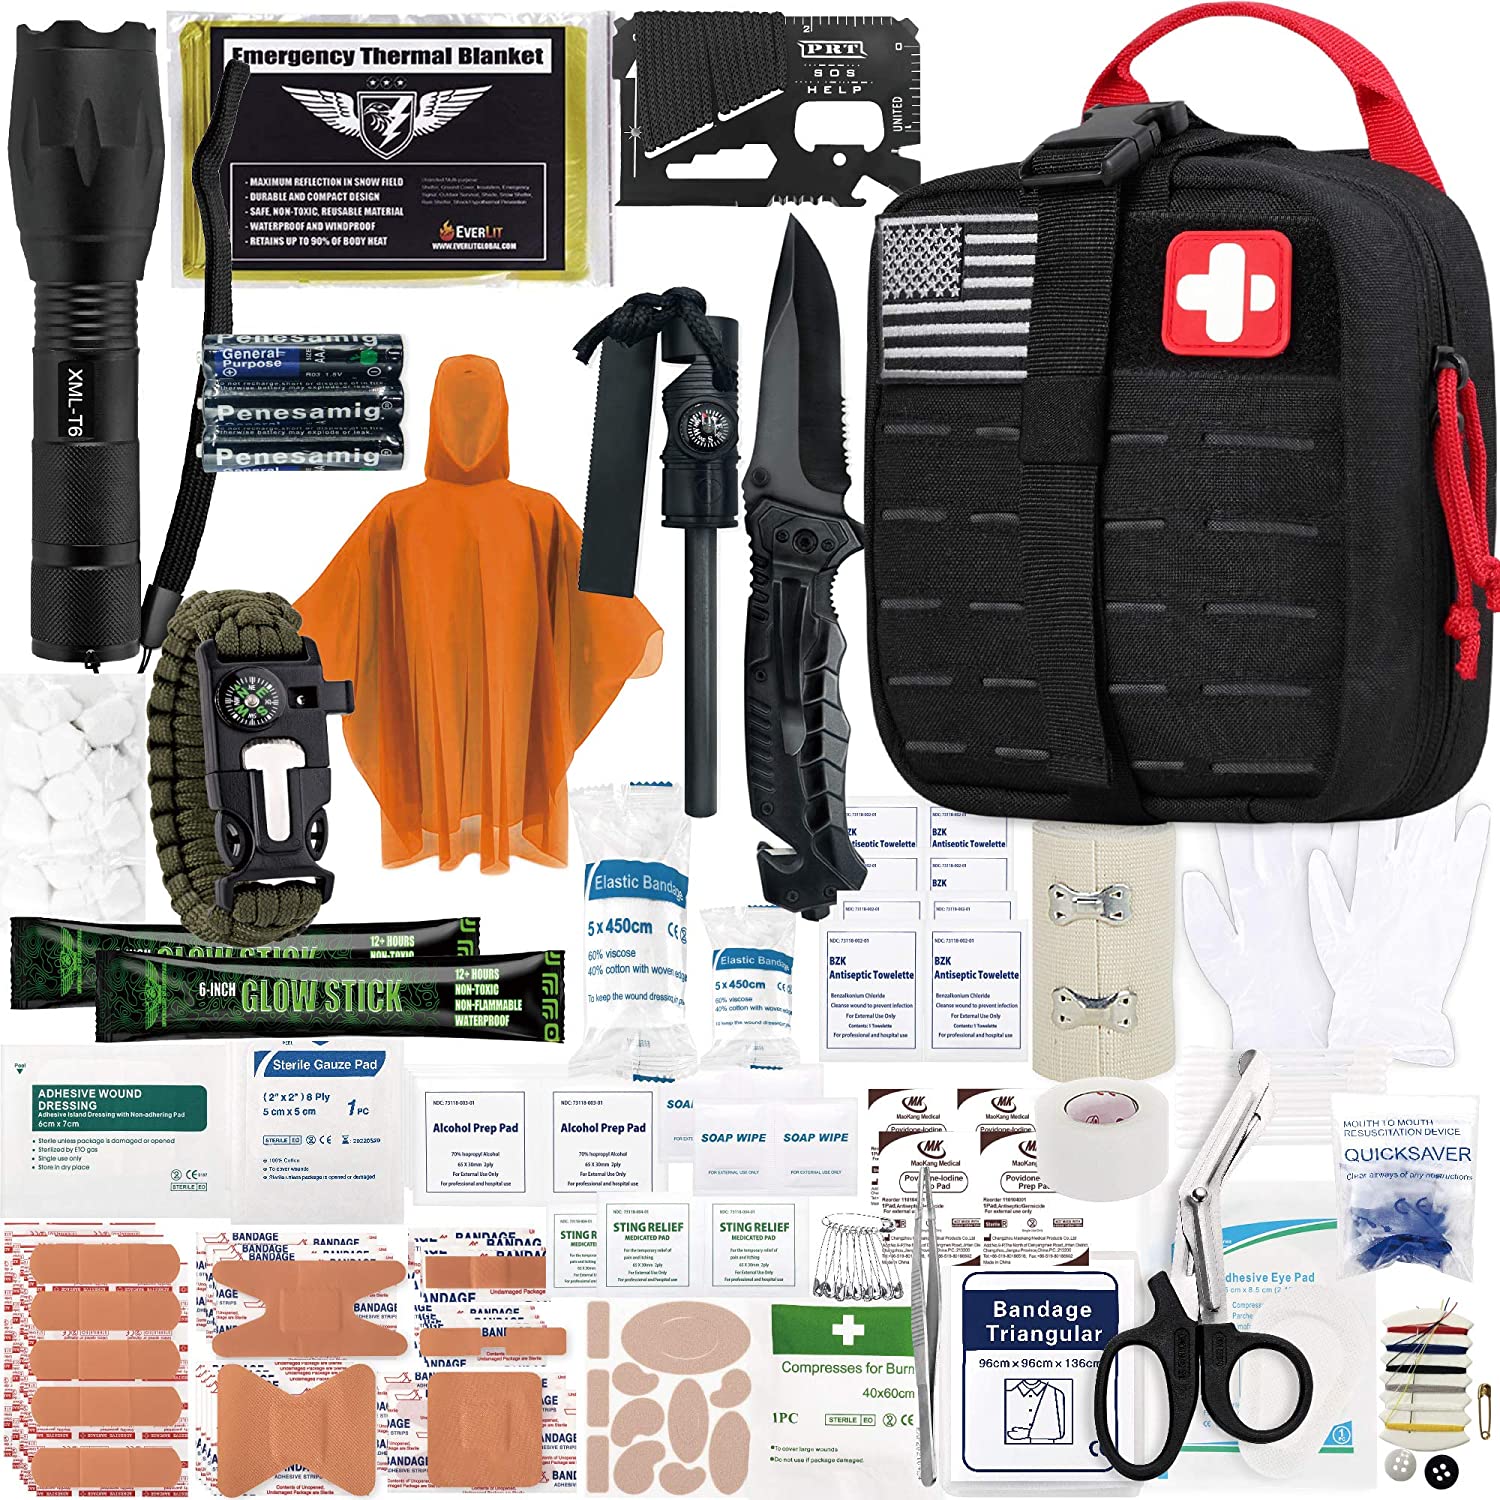 EVERLIT Survival Upgraded Survival First Aid Kit Emergency Gear Trauma Kit with 1000D Nylon Laser Cut Tactical EMT Pouch for Outdoor, Camping, Hunting, Hiking, Earthquake, Home, Office